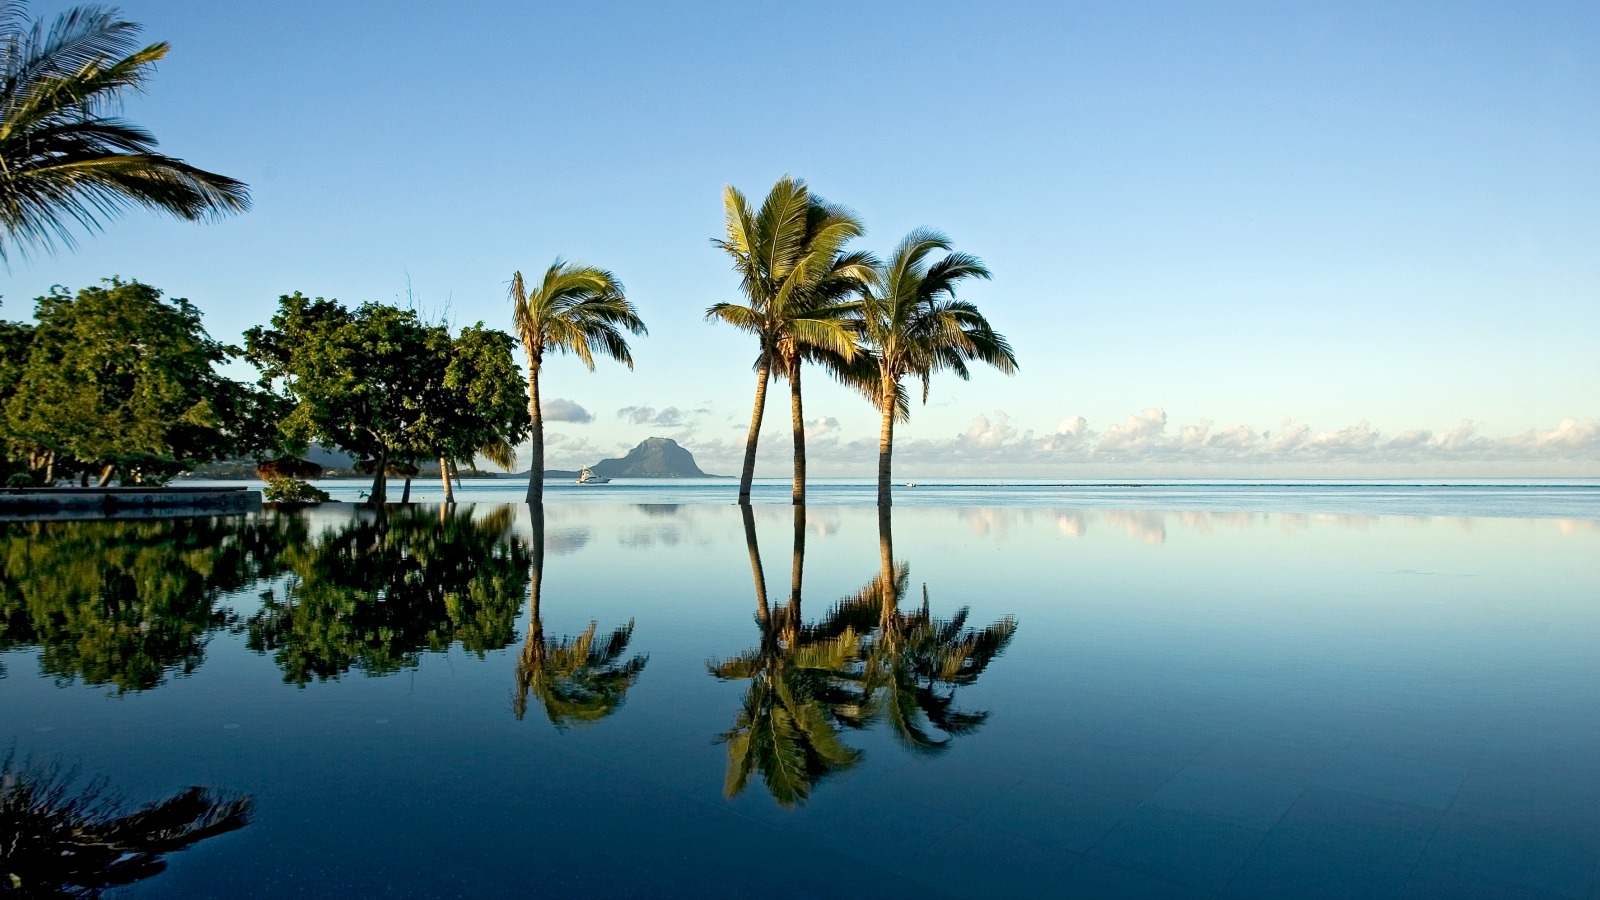 Beach Hotel On The Eastern Coast Of Mauritius Is All About Luxury / 1